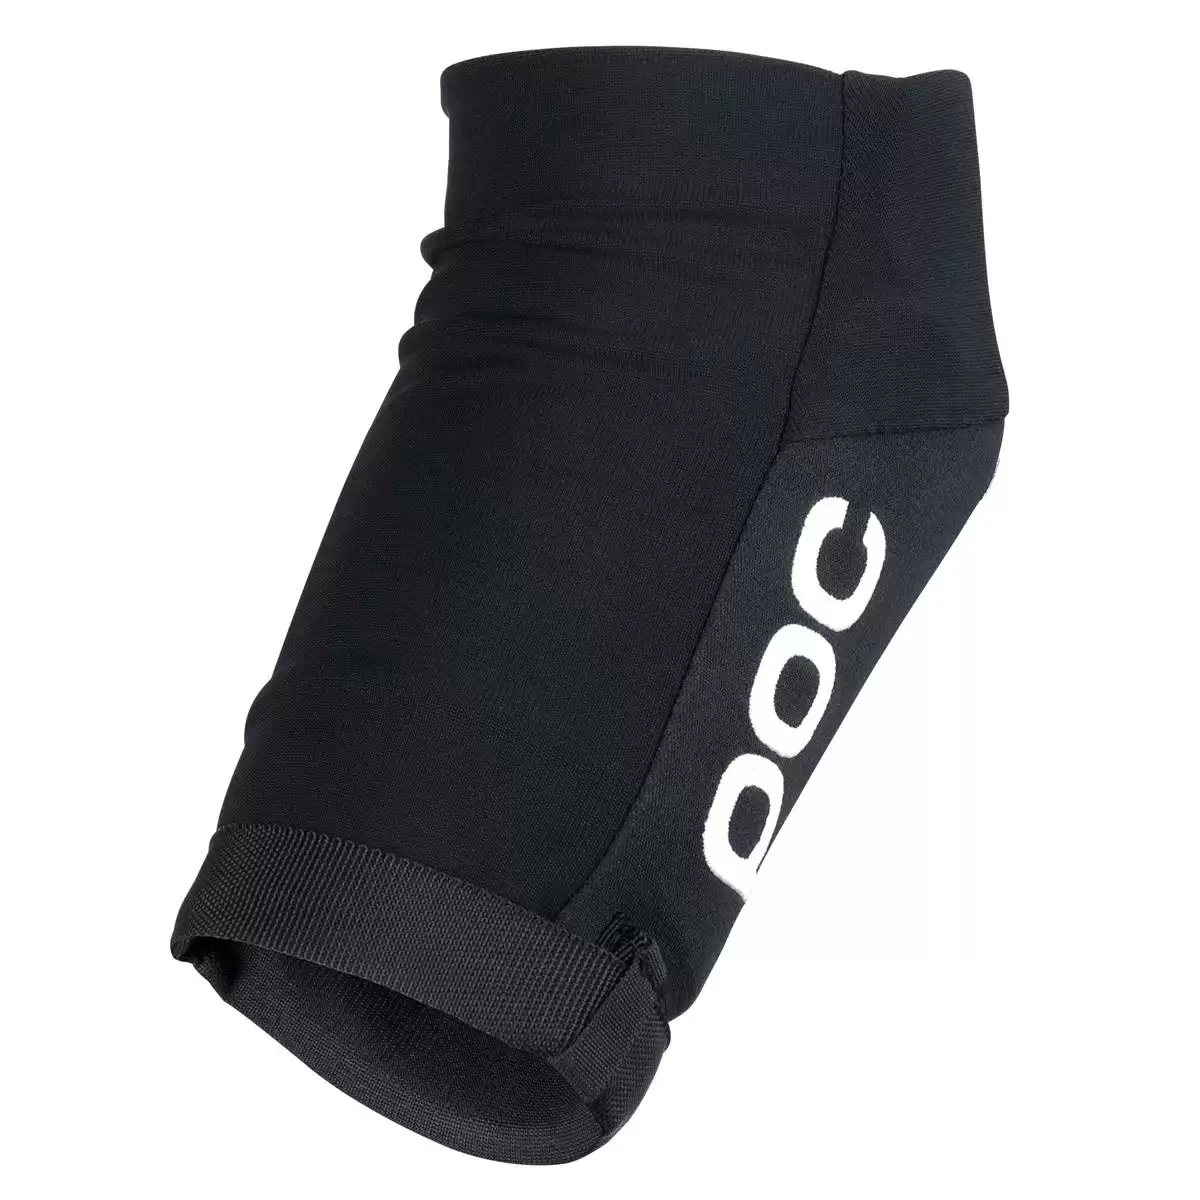 Joint VPD Air Elbow pads black size S #3